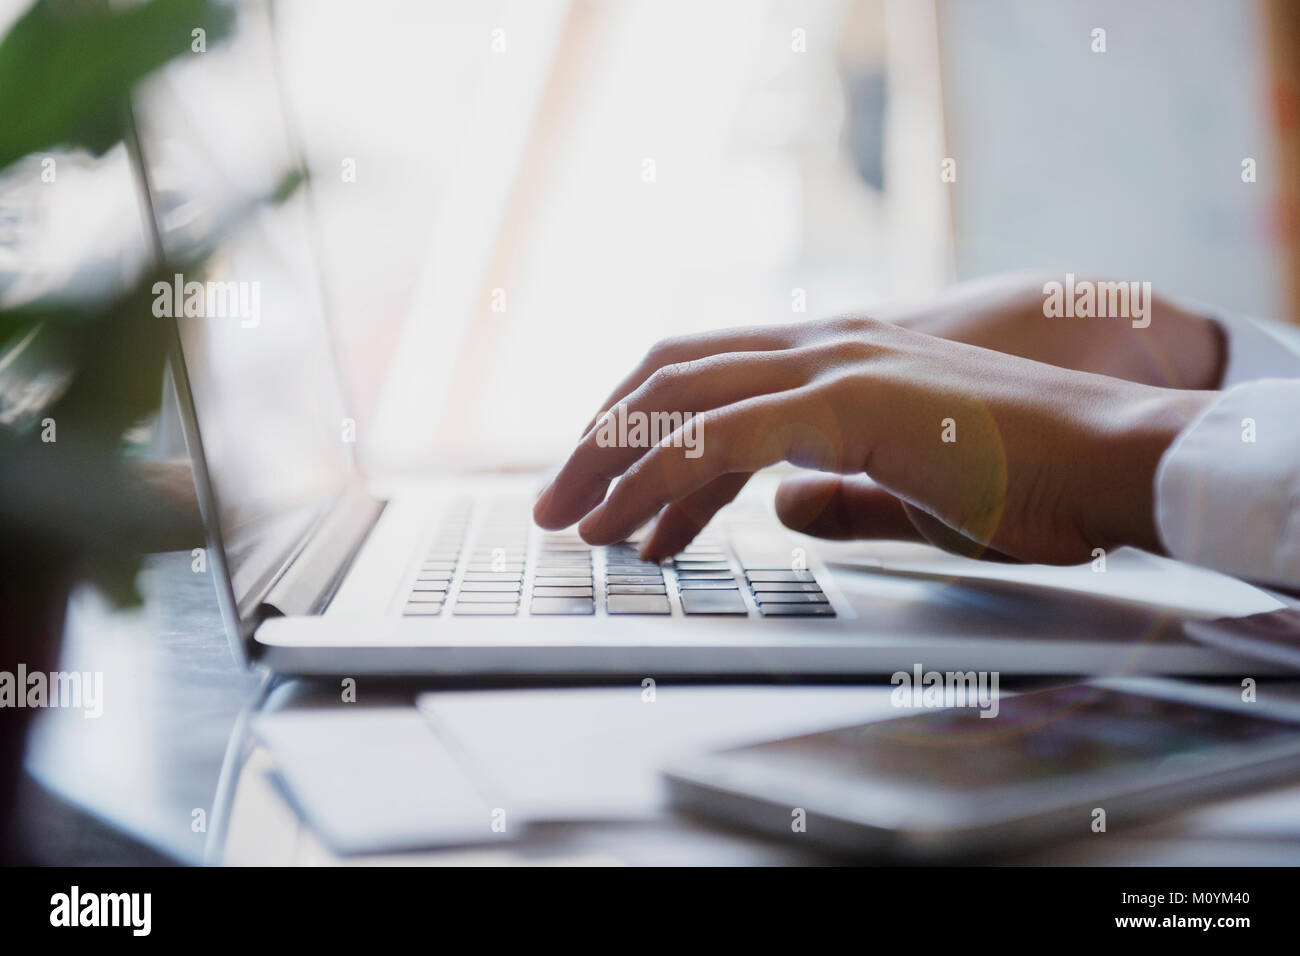 Hands of African American woman typing on laptop Stock Photo